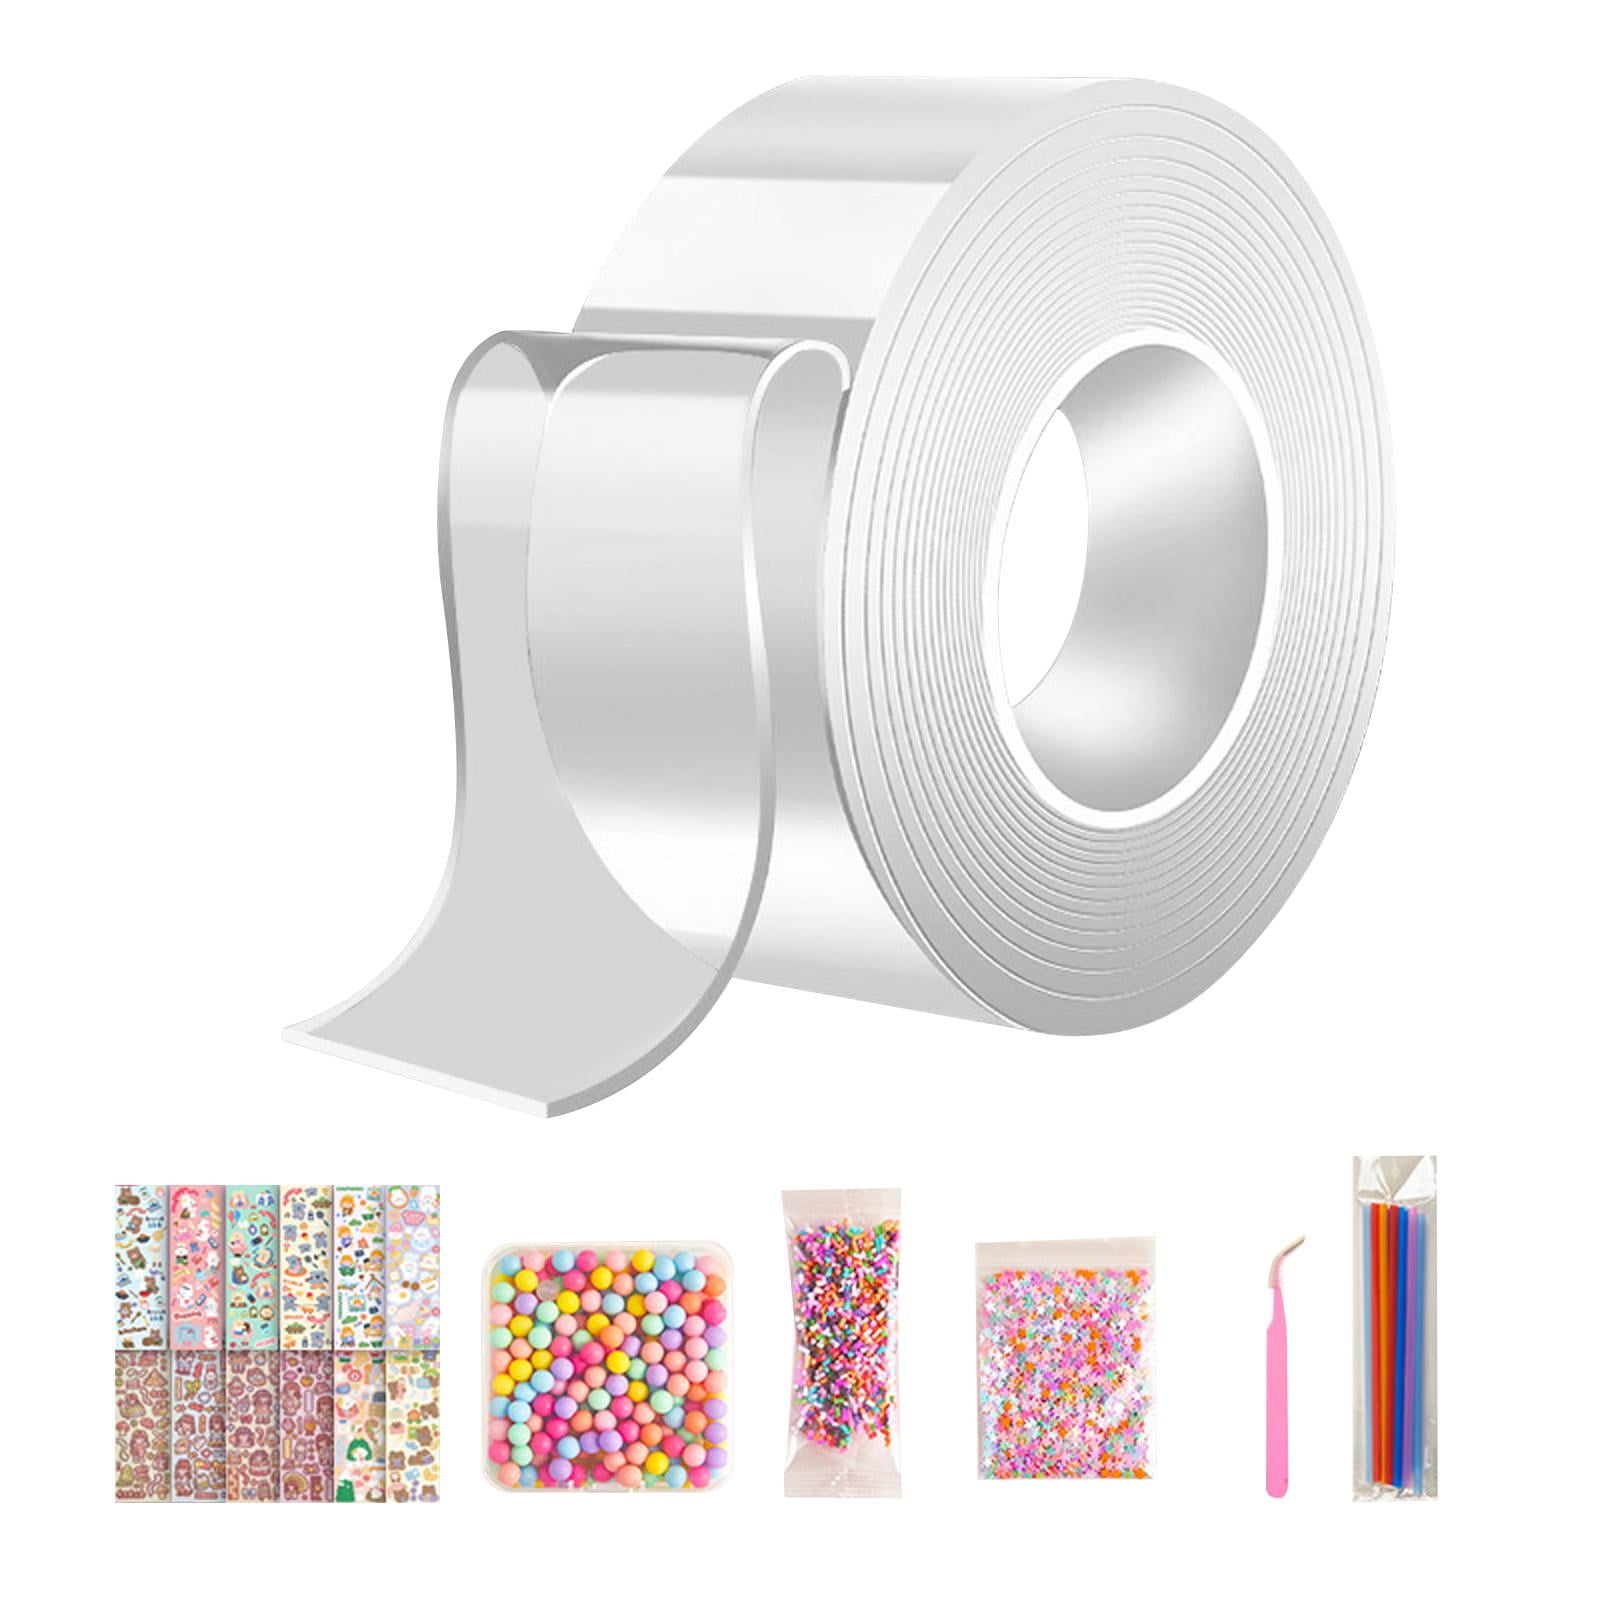 6 PCS Nano Tape Bubble Kit for Kids with Step-by-Step Video Tutorials, Nano  Double Sided Adhesive Gel Grip Traceless Tape, Nano Magic Tape Bubbles